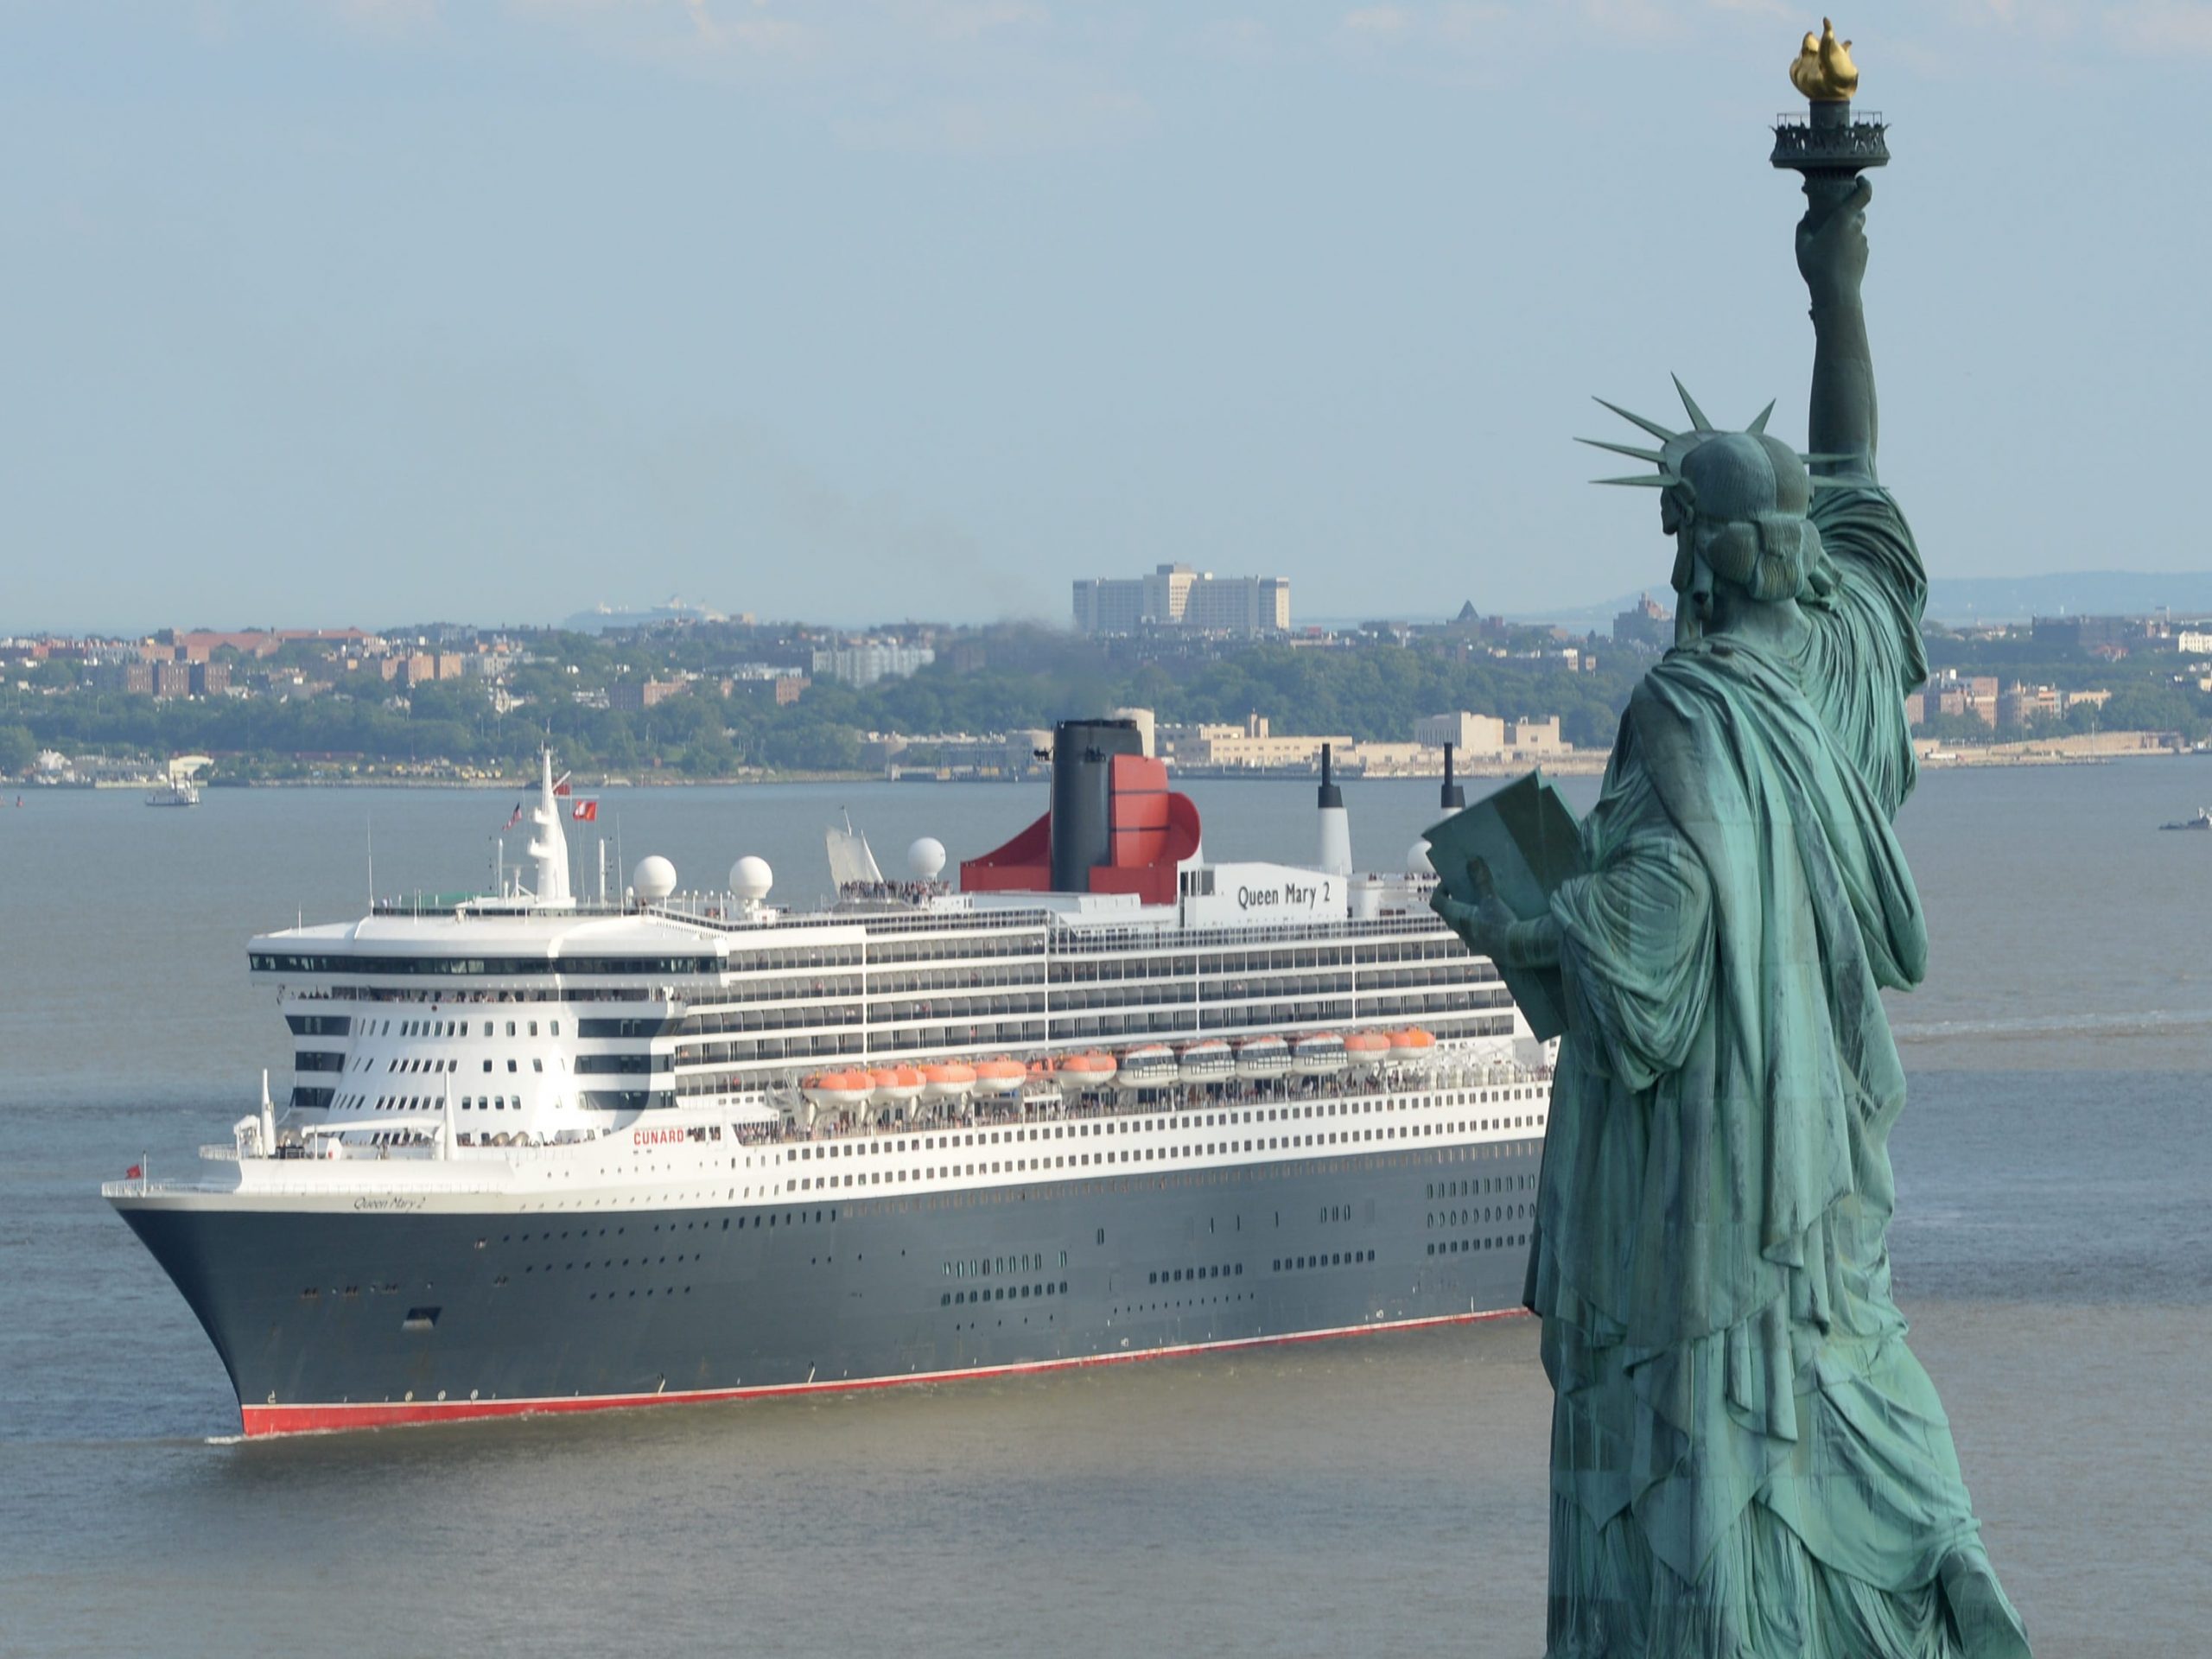 The Queen Mary 2 departs from New York.